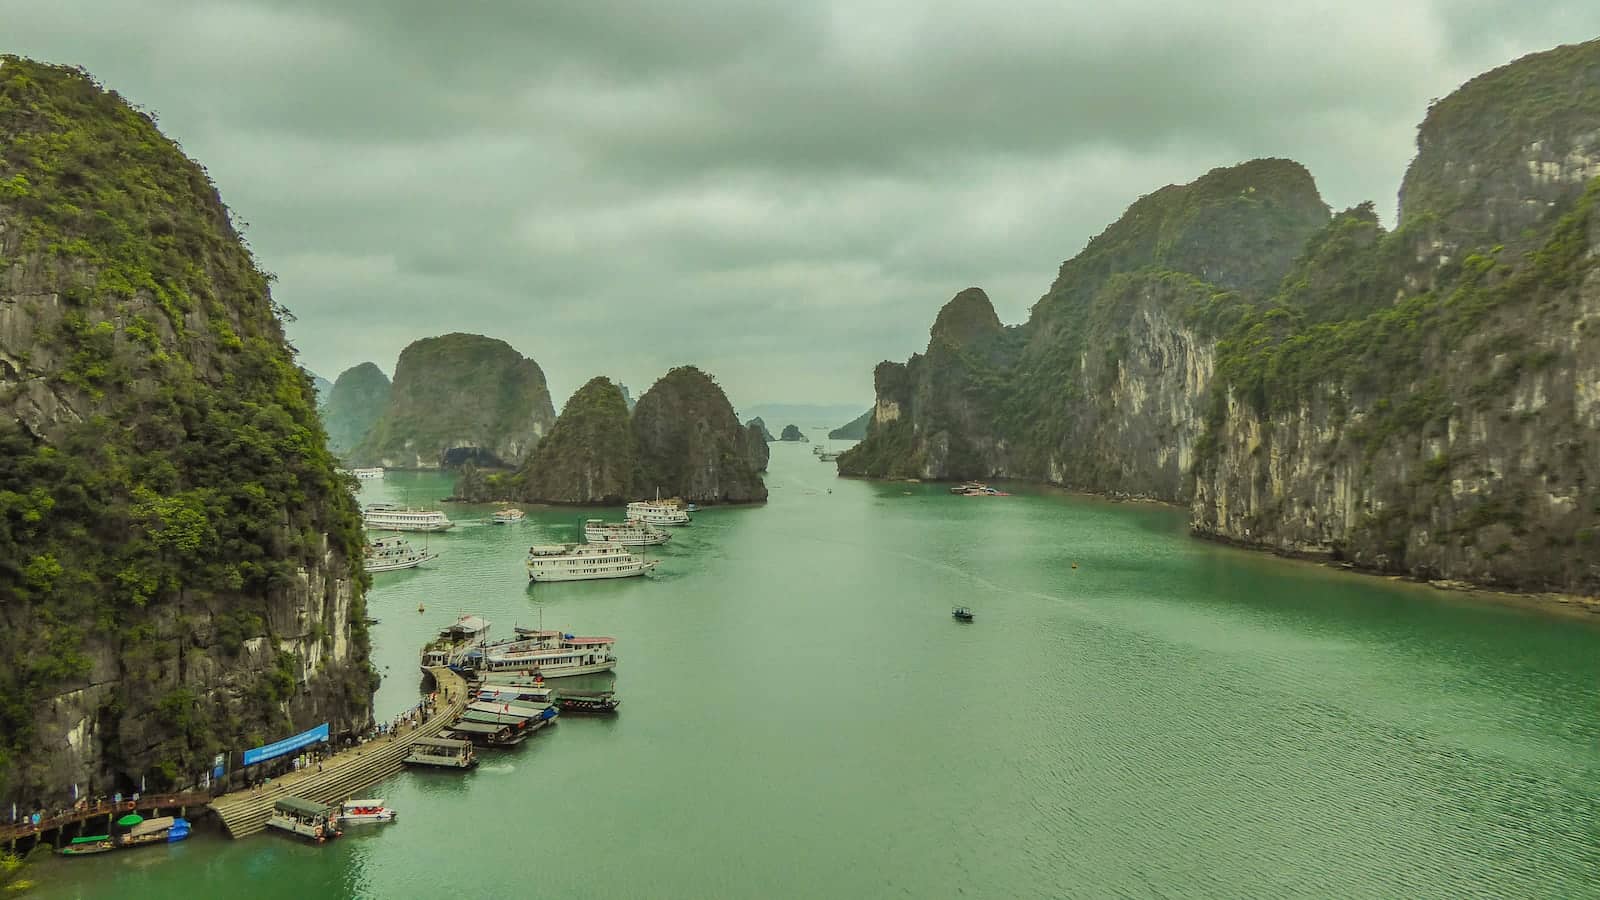 Halong Bay in Vietnam has the largest limestone island ecosystem in Asia